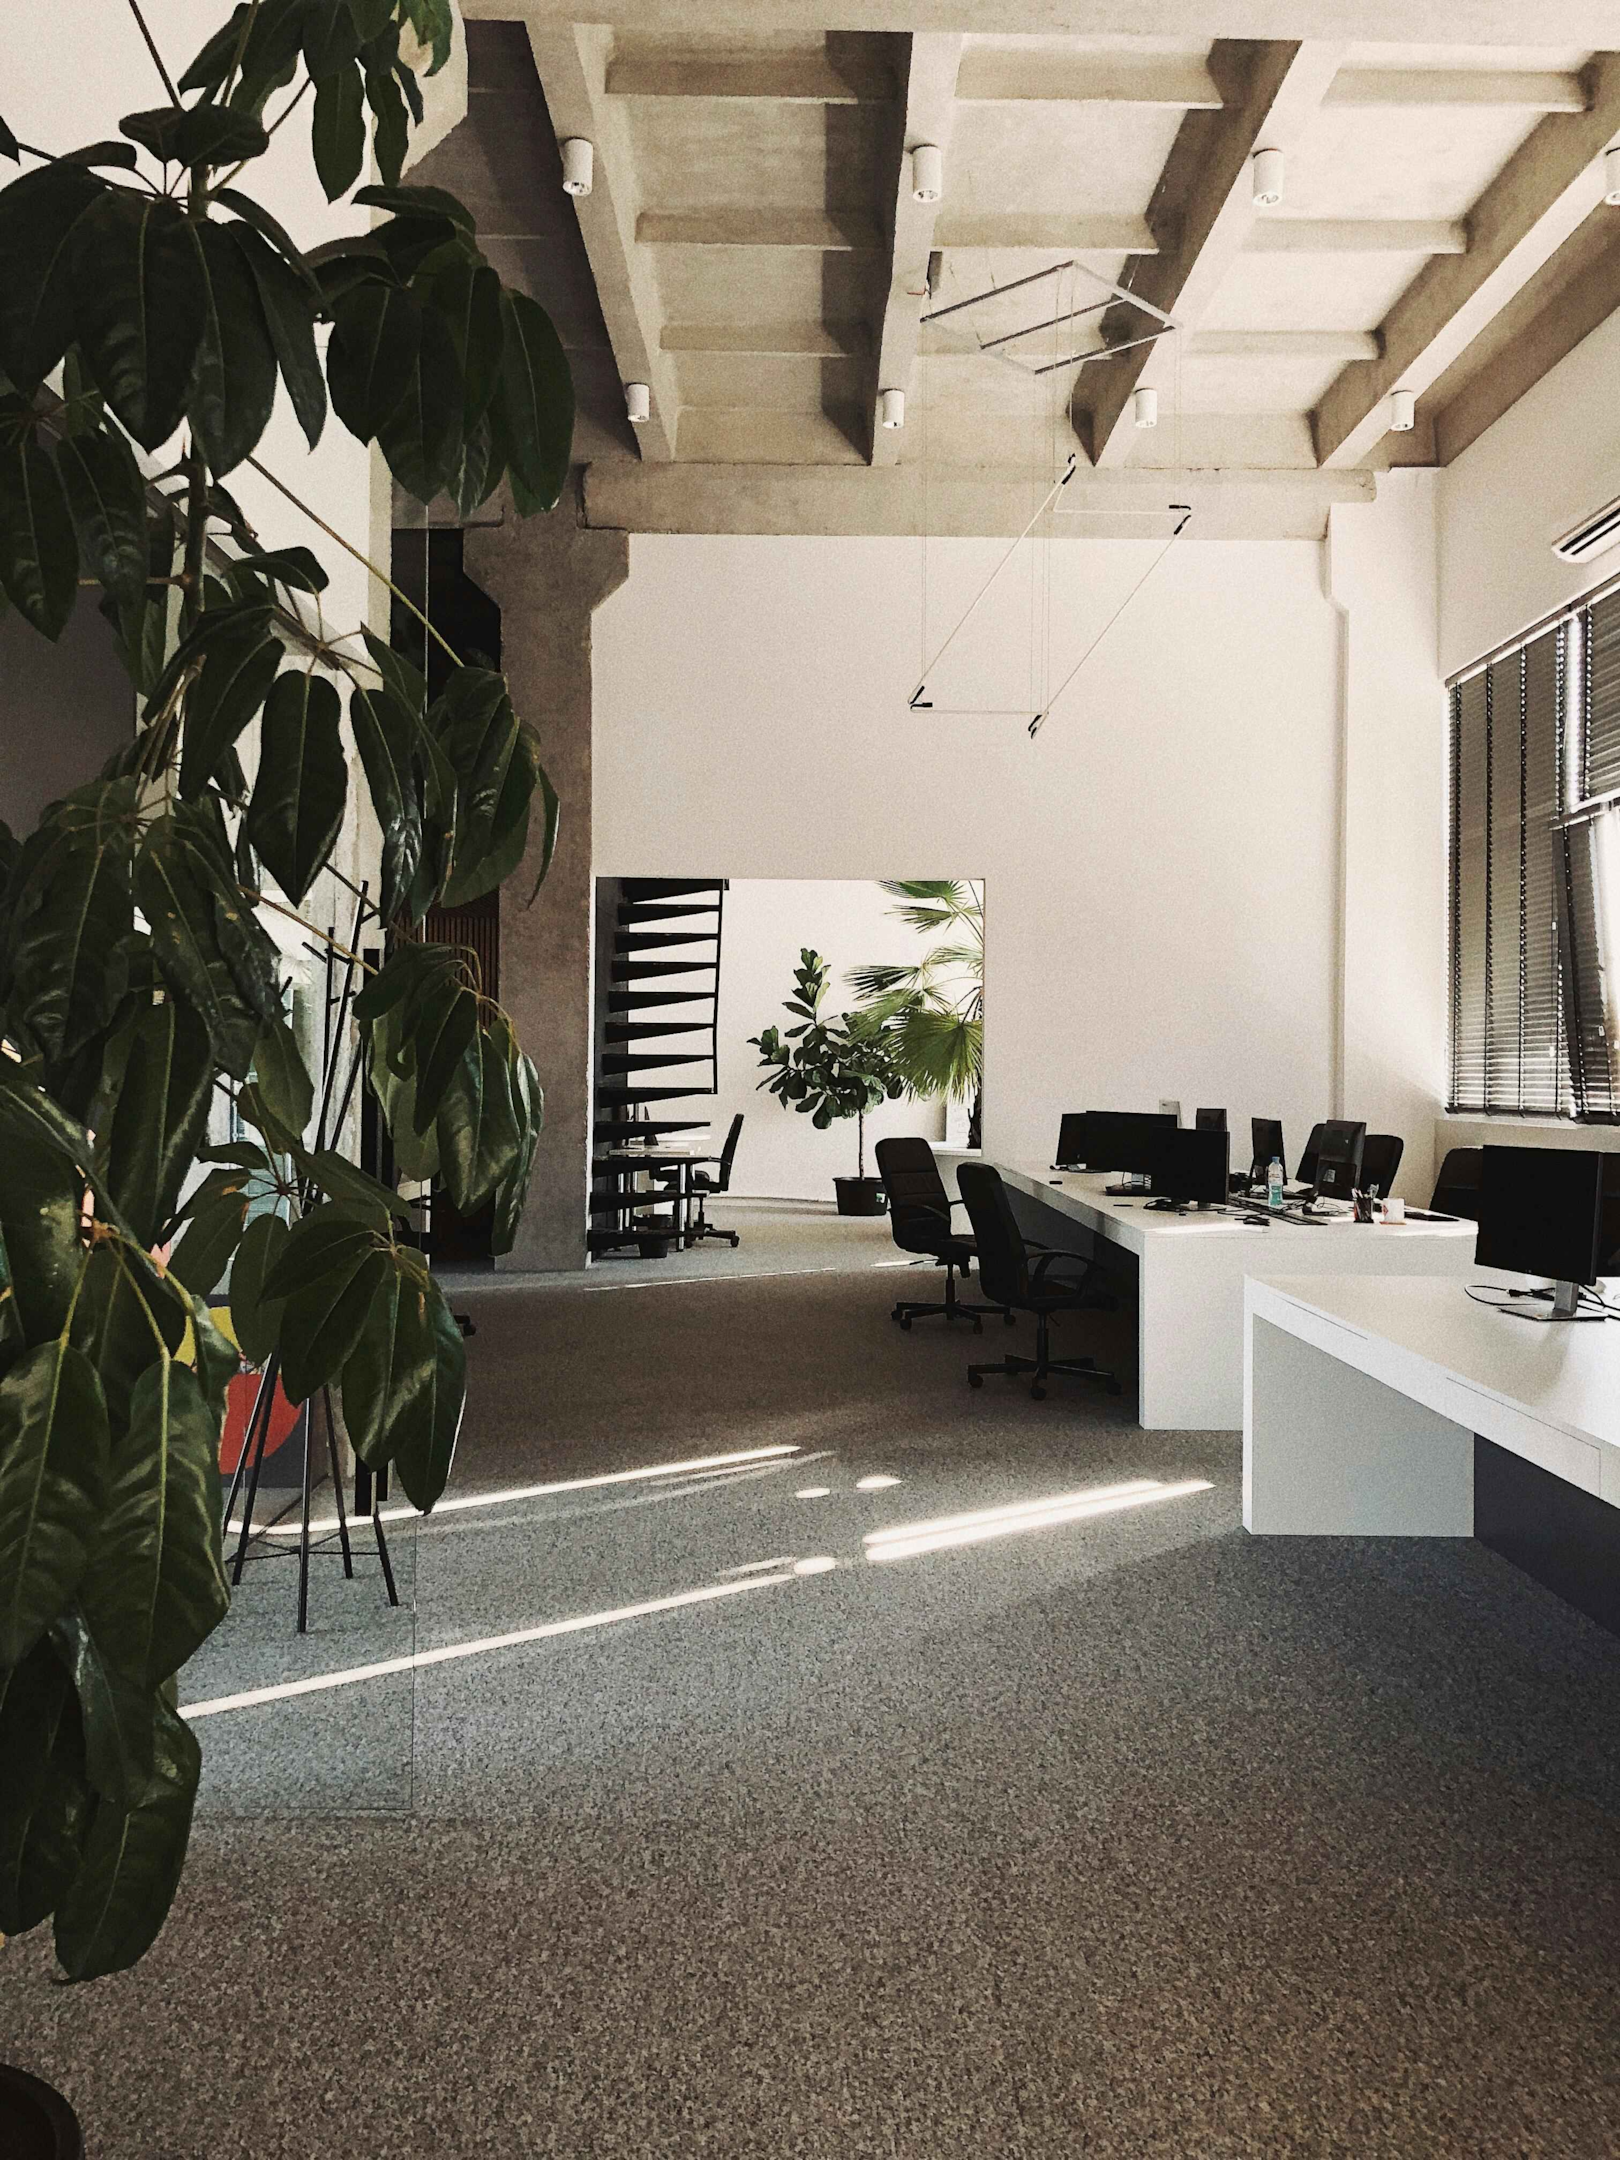 Natural light and including plants in the design of an office can promote wellbeing.